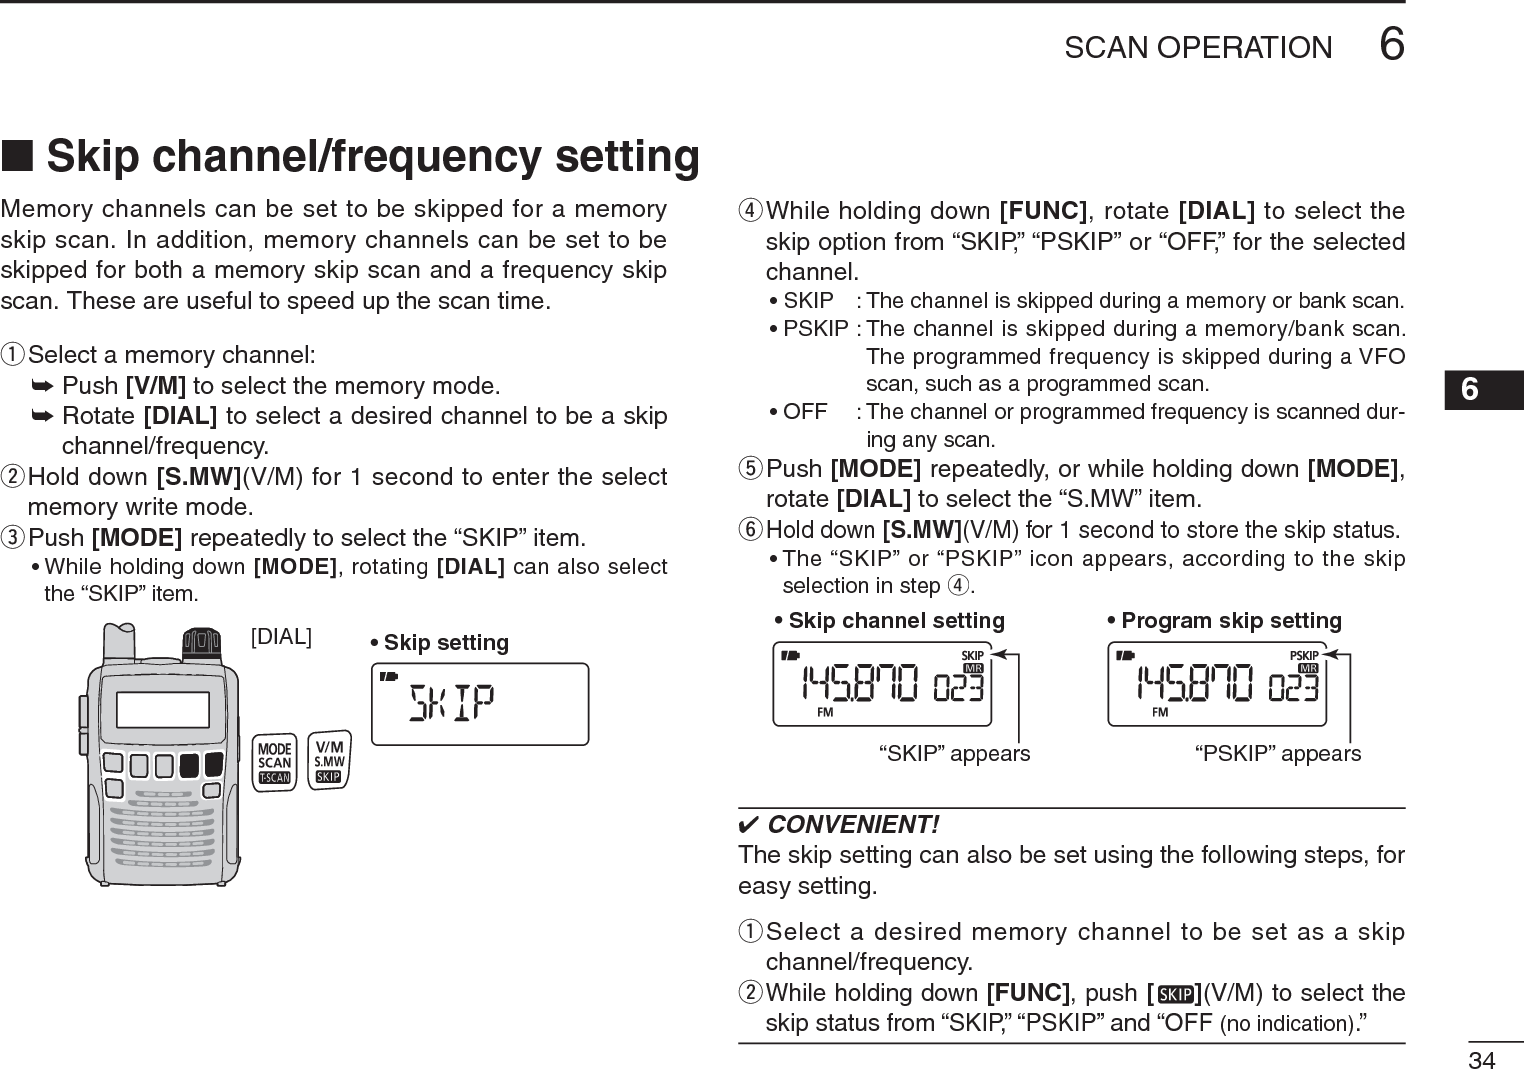 346SCAN OPERATION6Memory channels can be set to be skipped for a memory skip scan. In addition, memory channels can be set to be skipped for both a memory skip scan and a frequency skip scan. These are useful to speed up the scan time.qSelect a memory channel:± Push [V/M] to select the memory mode.±Rotate [DIAL] to select a desired channel to be a skip channel/frequency.w  Hold down [S.MW](V/M) for 1 second to enter the select memory write mode.ePush [MODE] repeatedly to select the “SKIP” item.• While holding down [MODE], rotating [DIAL] can also select the “SKIP” item.[DIAL] • Skip settingr  While holding down [FUNC], rotate [DIAL] to select the skip option from “SKIP,” “PSKIP” or “OFF,” for the selected channel.• SKIP : The channel is skipped during a memory or bank scan. • PSKIP : The channel is skipped during a memory/bank scan. The programmed frequency is skipped during a VFO scan, such as a programmed scan.• OFF : The channel or programmed frequency is scanned dur-ing any scan.t  Push [MODE] repeatedly, or while holding down [MODE],rotate [DIAL] to select the “S.MW” item.y  Hold down [S.MW](V/M) for 1 second to store the skip status.• The “SKIP” or “PSKIP” icon appears, according to the skip selection in step r.• Skip channel setting • Program skip setting“SKIP” appears “PSKIP” appears CONVENIENT!The skip setting can also be set using the following steps, for easy setting.q  Select a desired memory channel to be set as a skip channel/frequency.wWhile holding down [FUNC], push [ ](V/M) to select the skip status from “SKIP,” “PSKIP” and “OFF (no indication).”N Skip channel/frequency setting